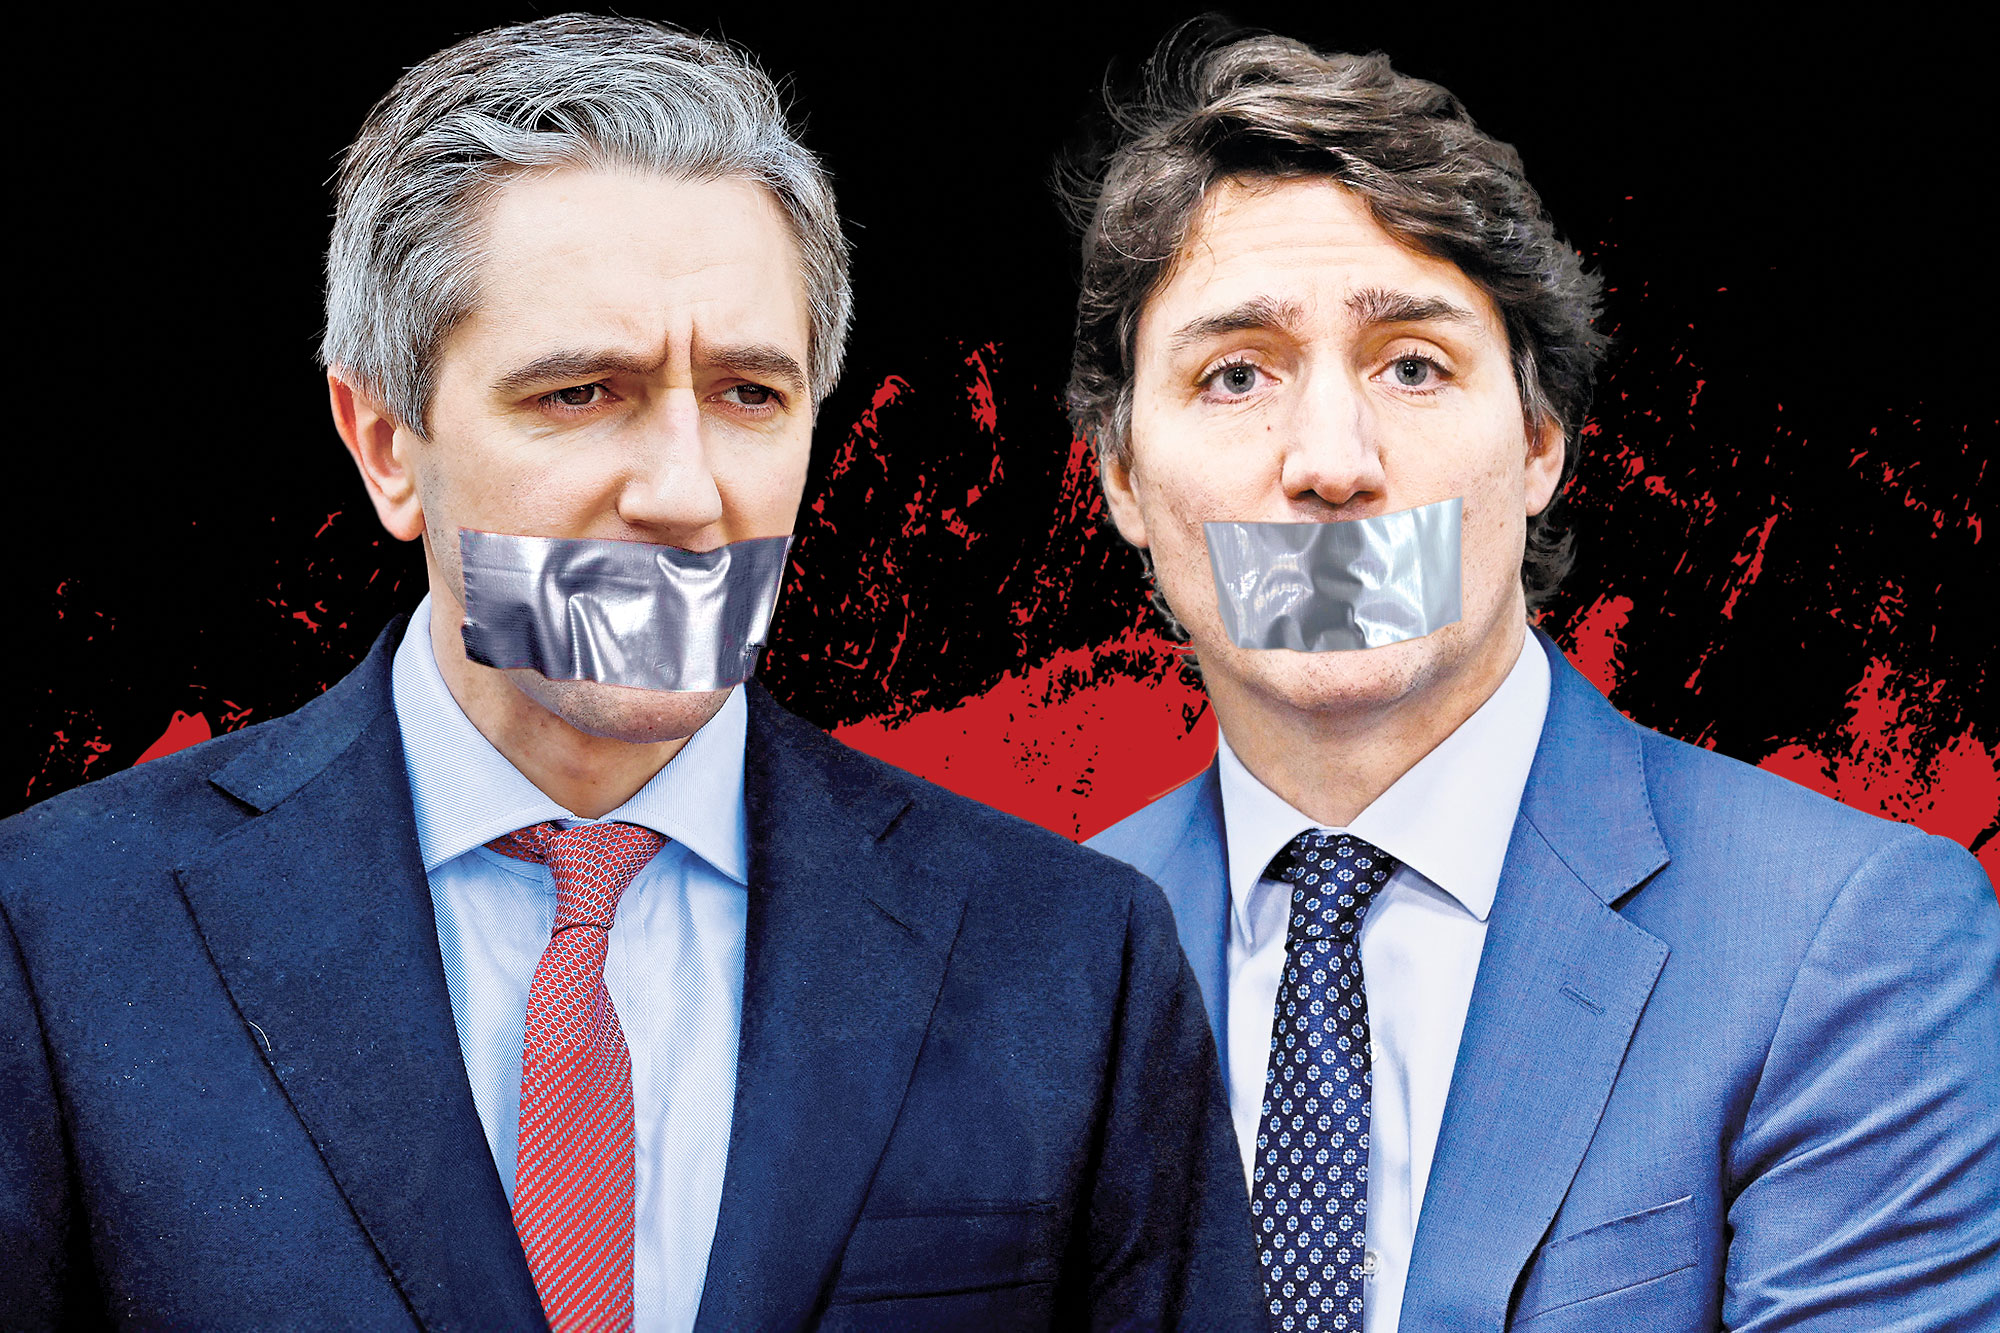 New hate-speech laws are coming into practice across the globe, including in Ireland — which has a new leader Simon Harris (l) — and in Canada, led by Justin Trudeau.